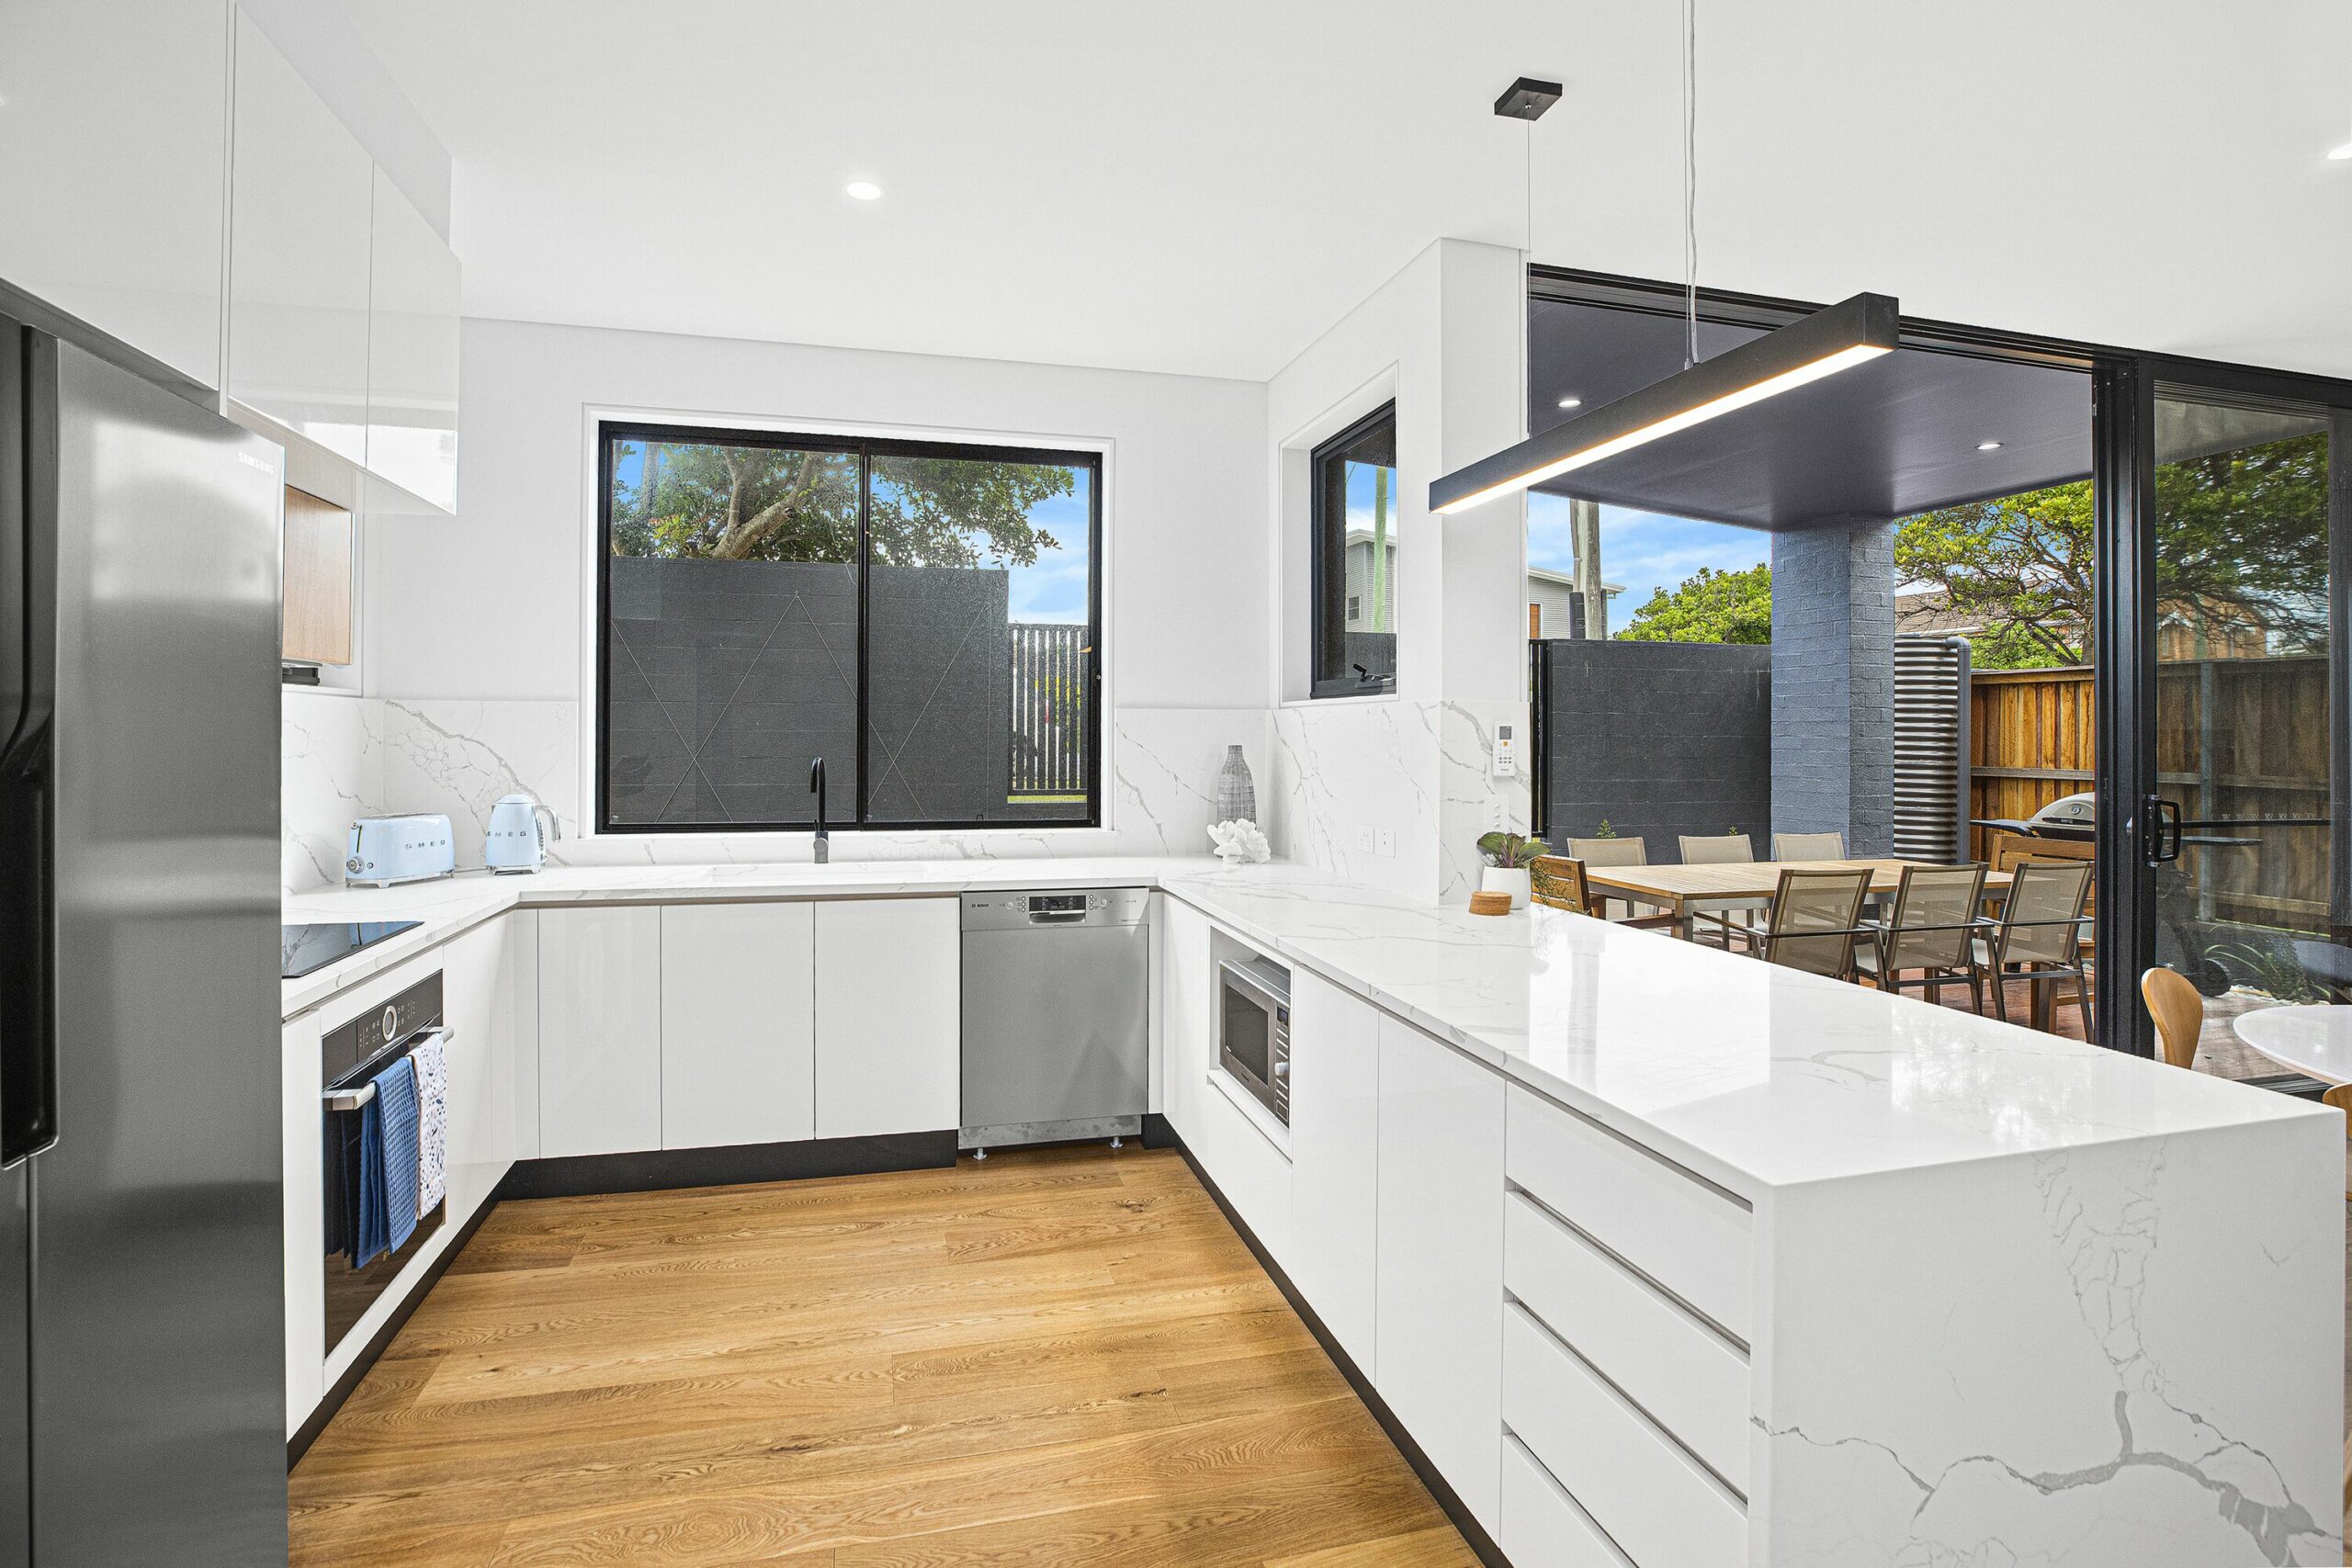 Suite 1 - Brand new Townhouse in Central Sawtell